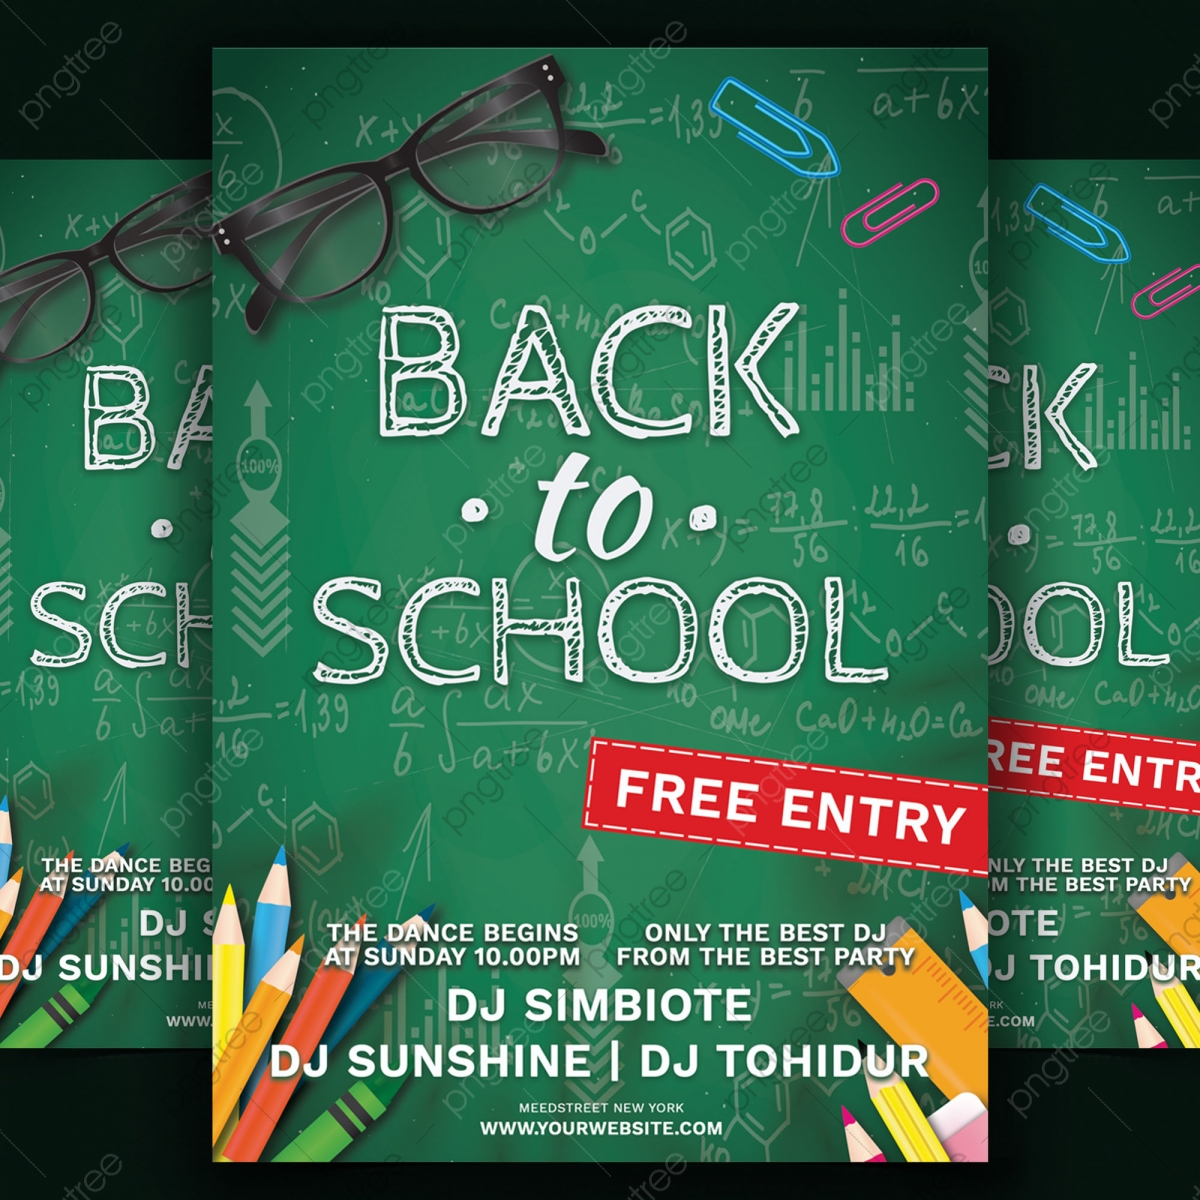 Back To School Event Flyer Template Download on Pngtree With School Event Flyer Template With Regard To School Event Flyer Template